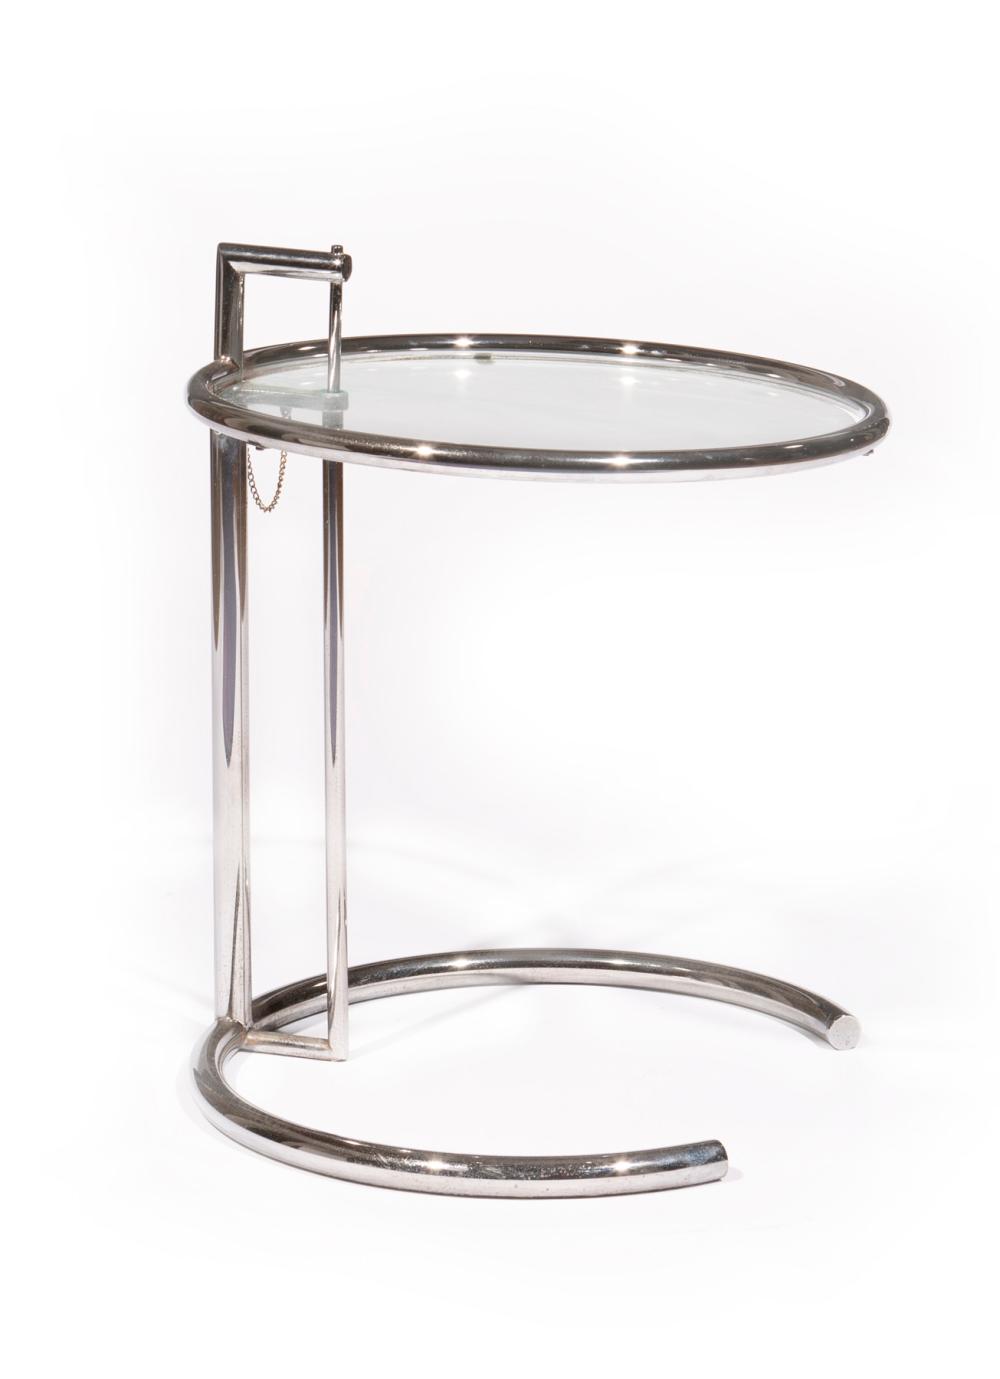 EILEEN GRAY CHROME AND GLASS SIDE